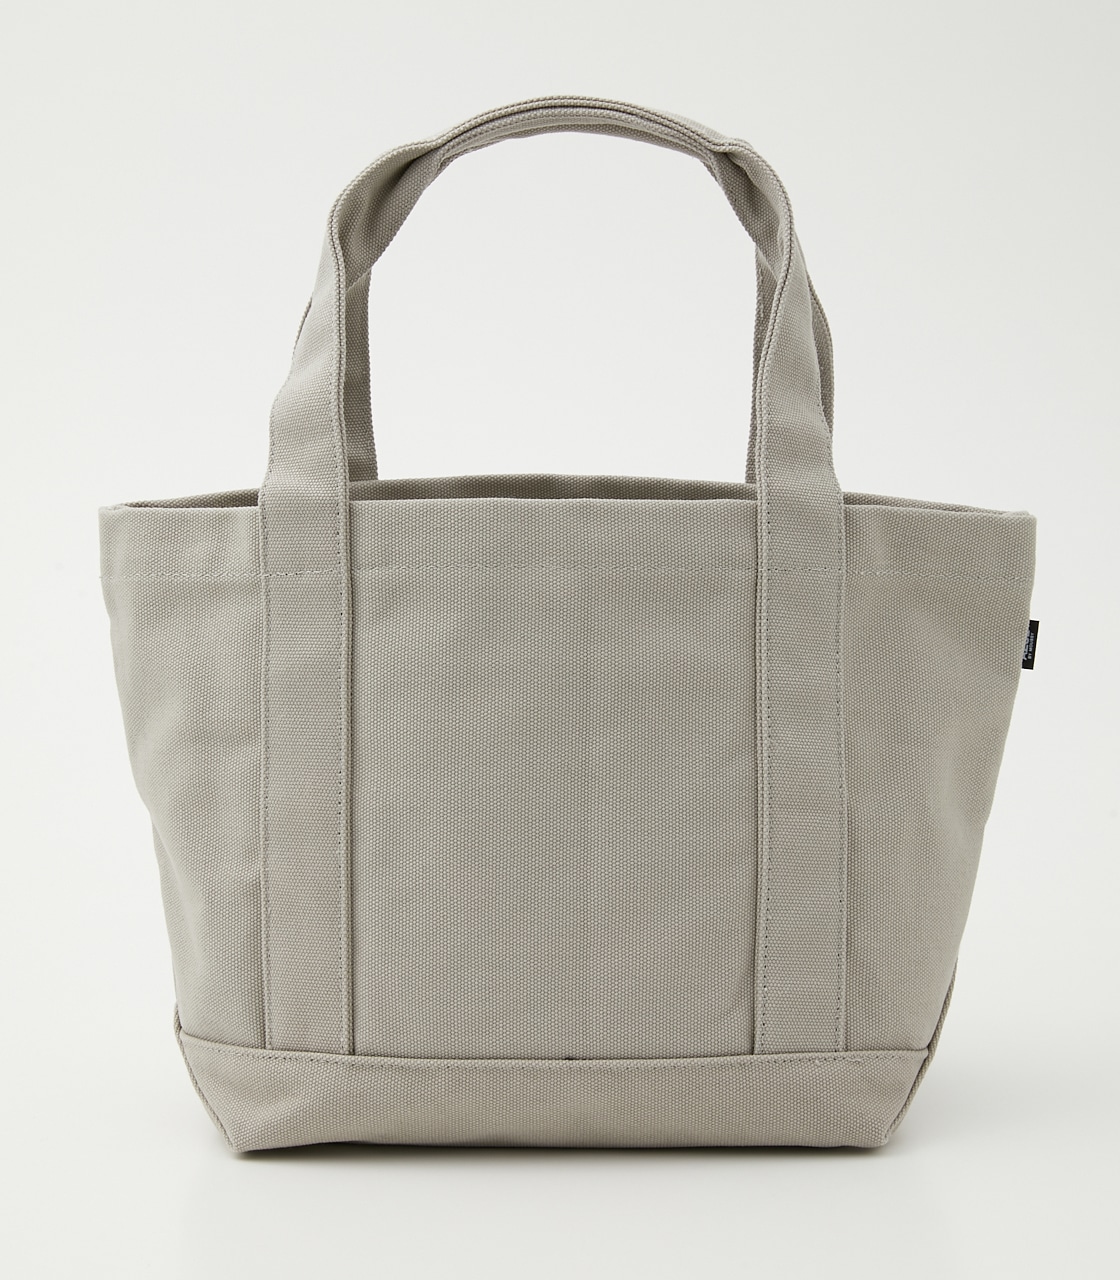 AZUL CANVAS TOTE BAG/AZULキャンバストートバッグ 詳細画像 L/GRY 4